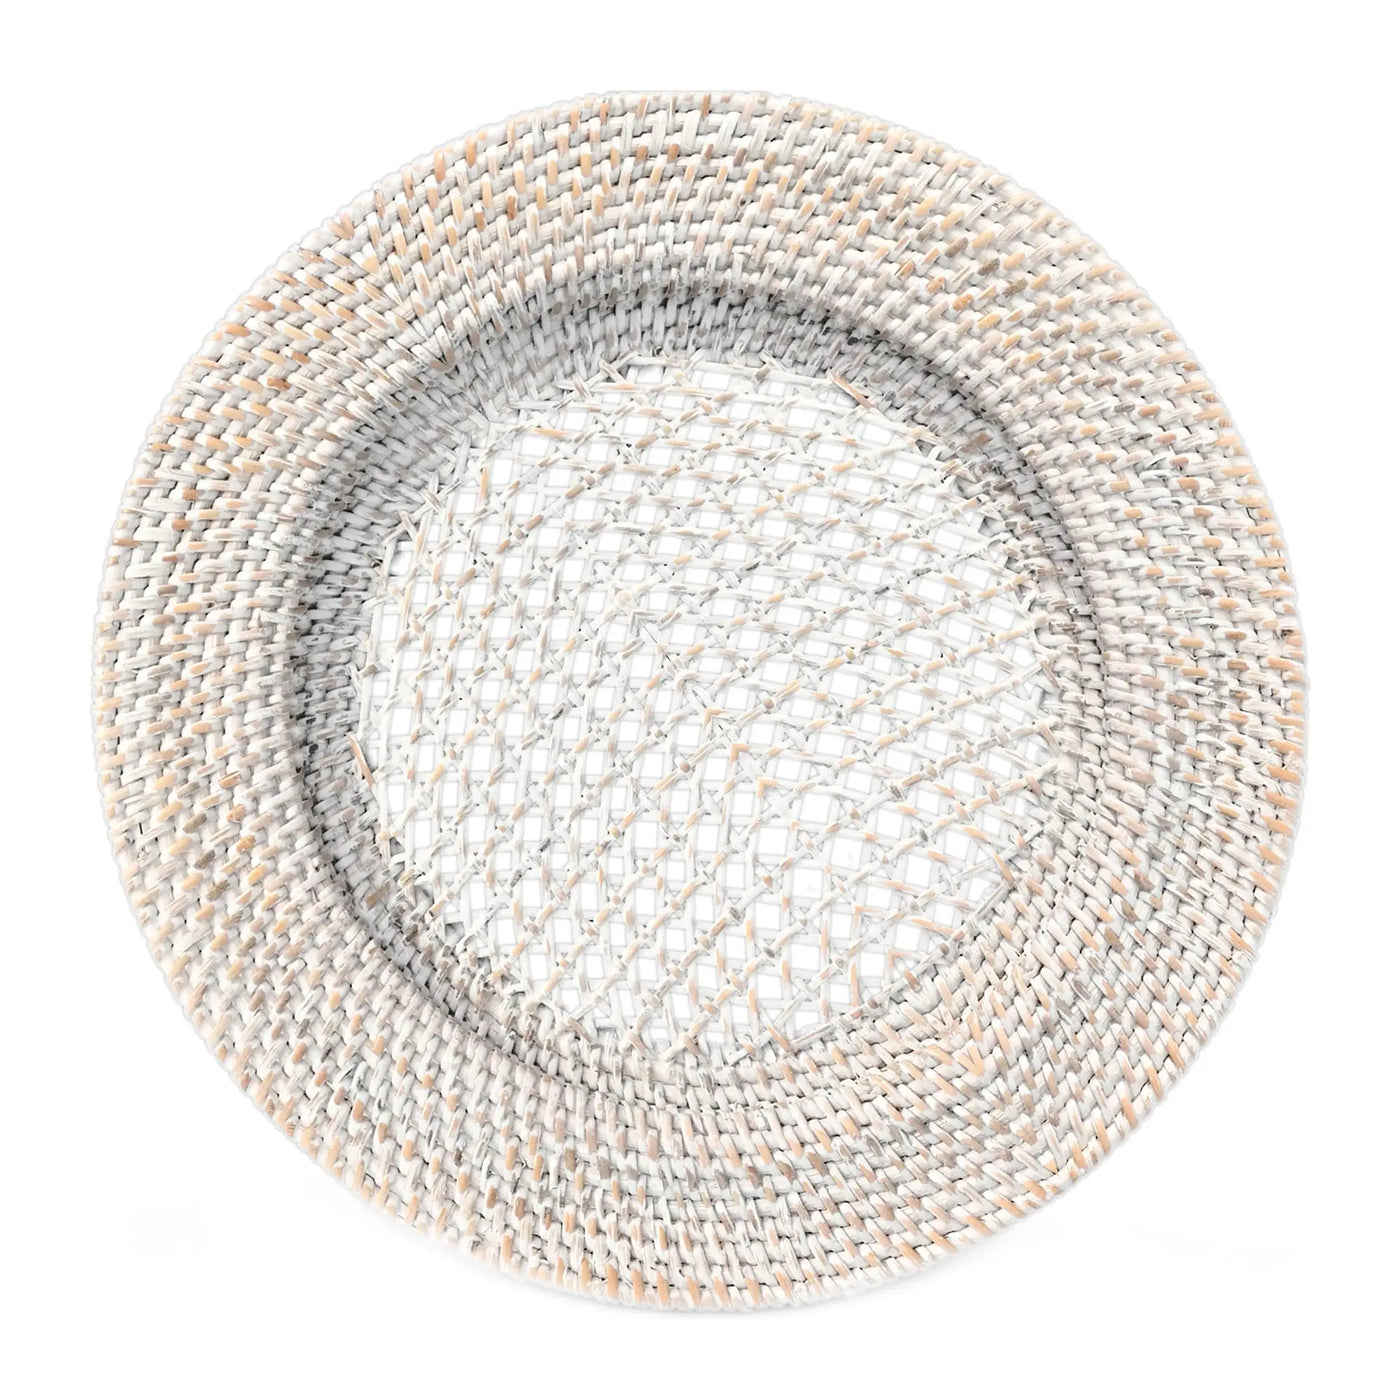 Whitewash Rattan Charger Plate - Woven Wicker Straw Placemat